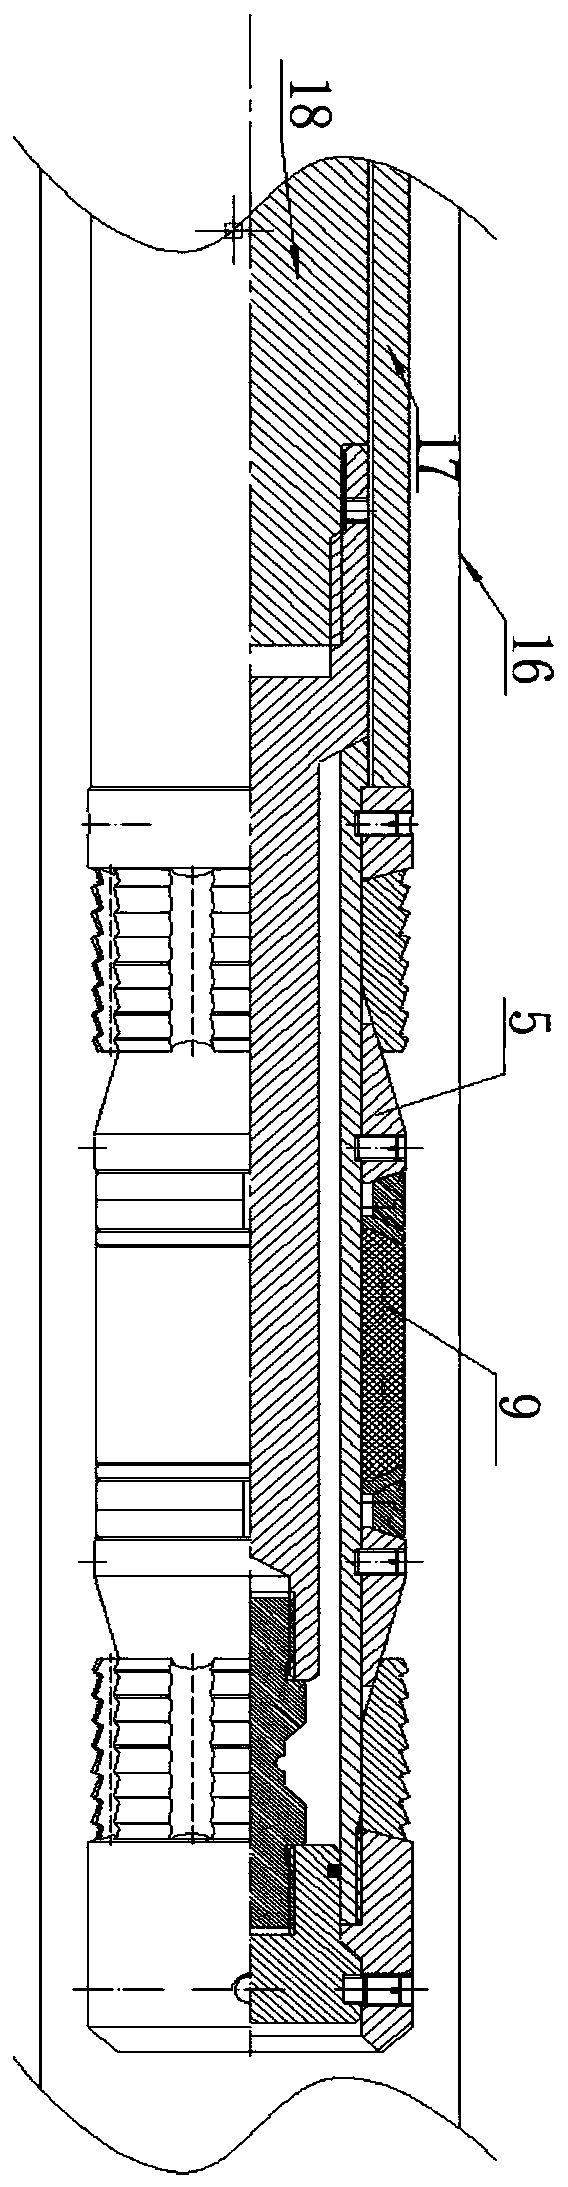 Large-drift-diameter treatment-free downhole high-pressure temporary plugging tool and method